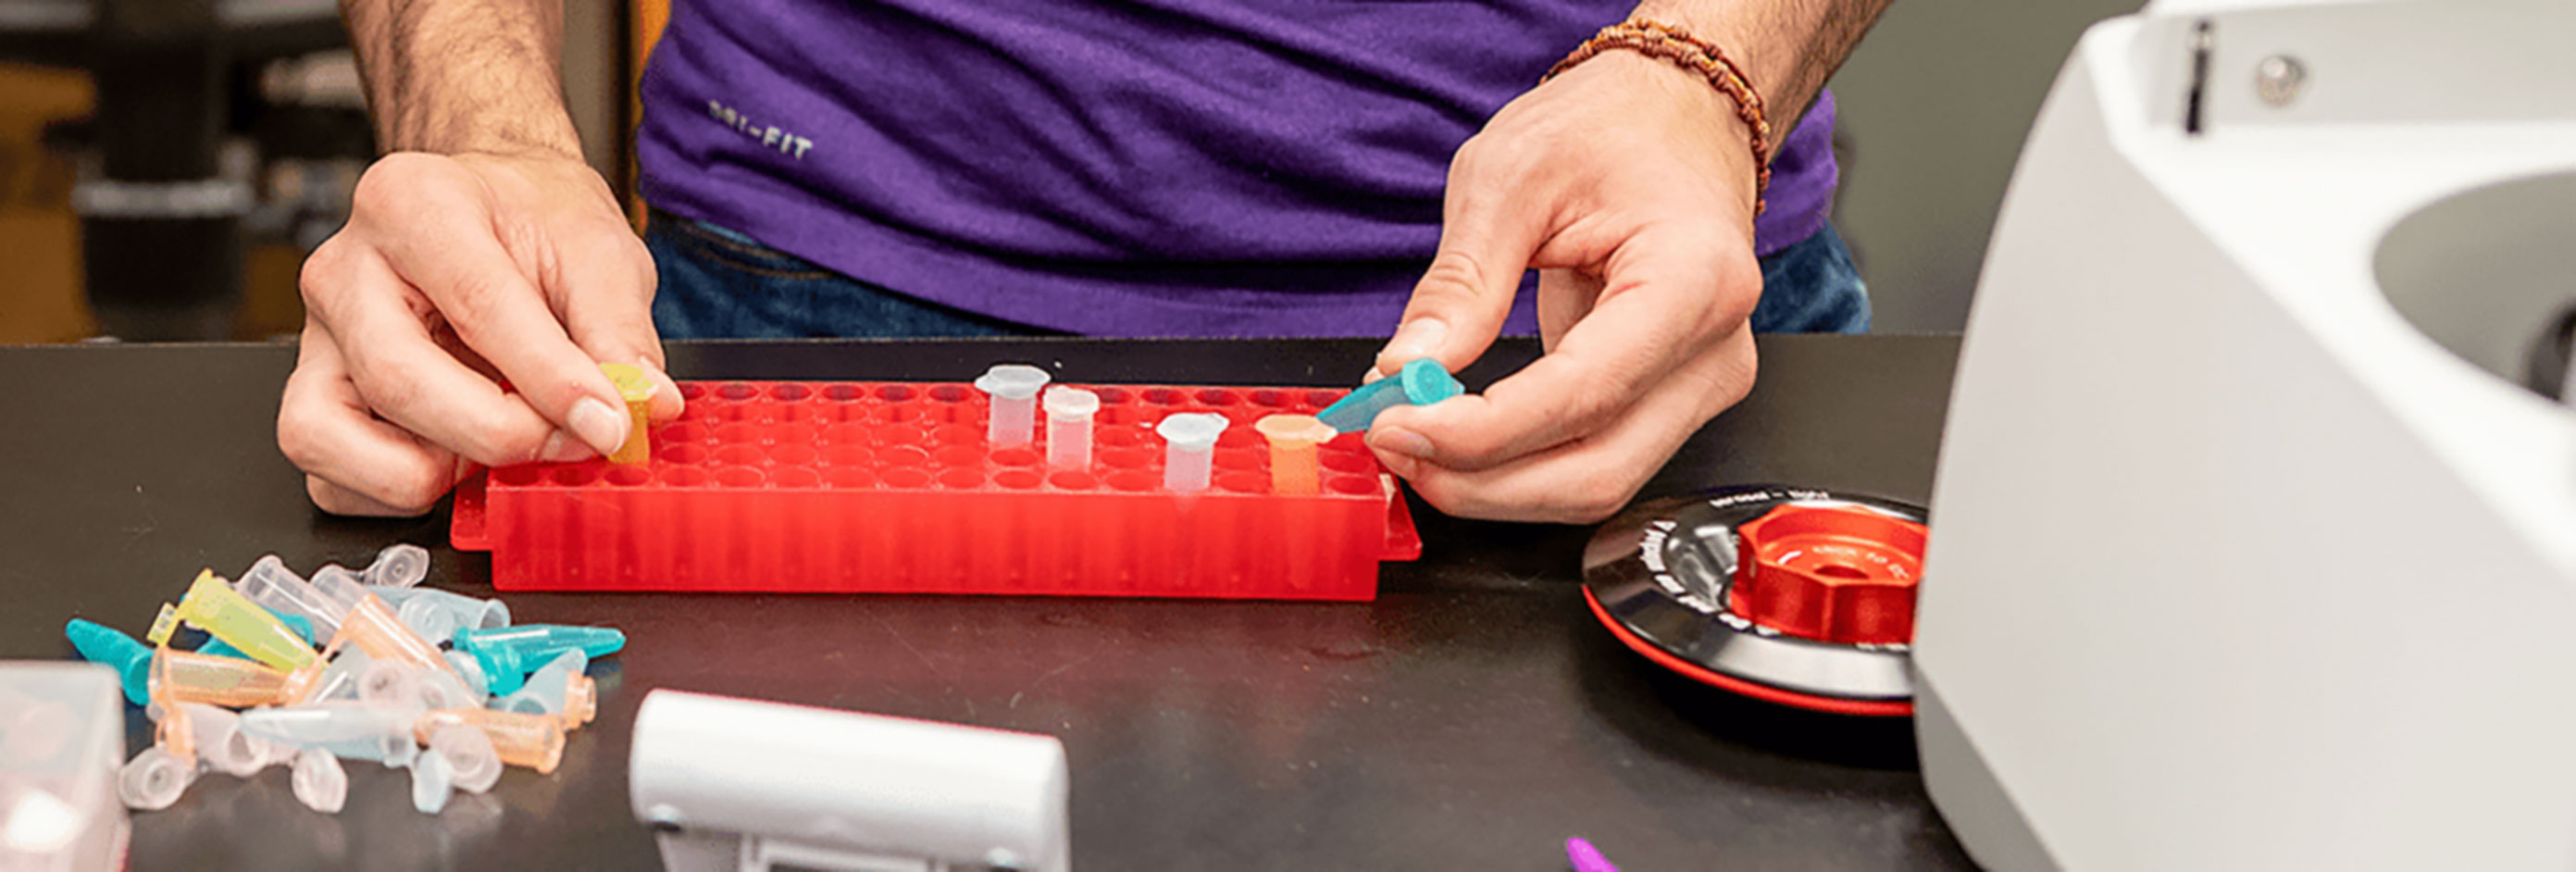 Student separating blood samples into a tray full of test tubes.